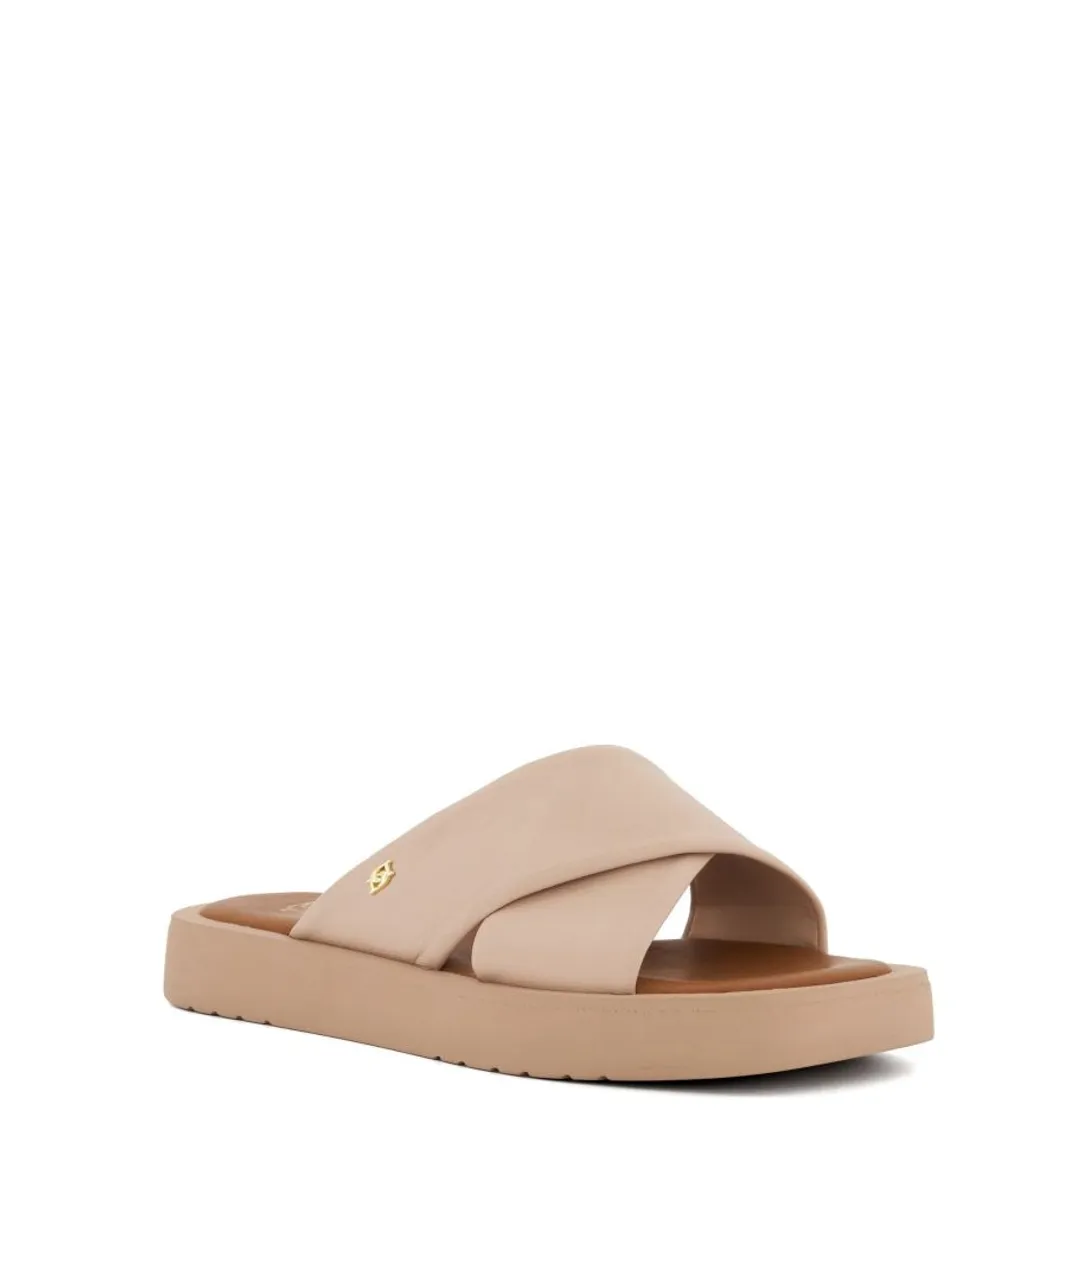 Dune London Womens Ladies Liquor - Flat Casual Sandals - Nude Leather (archived)